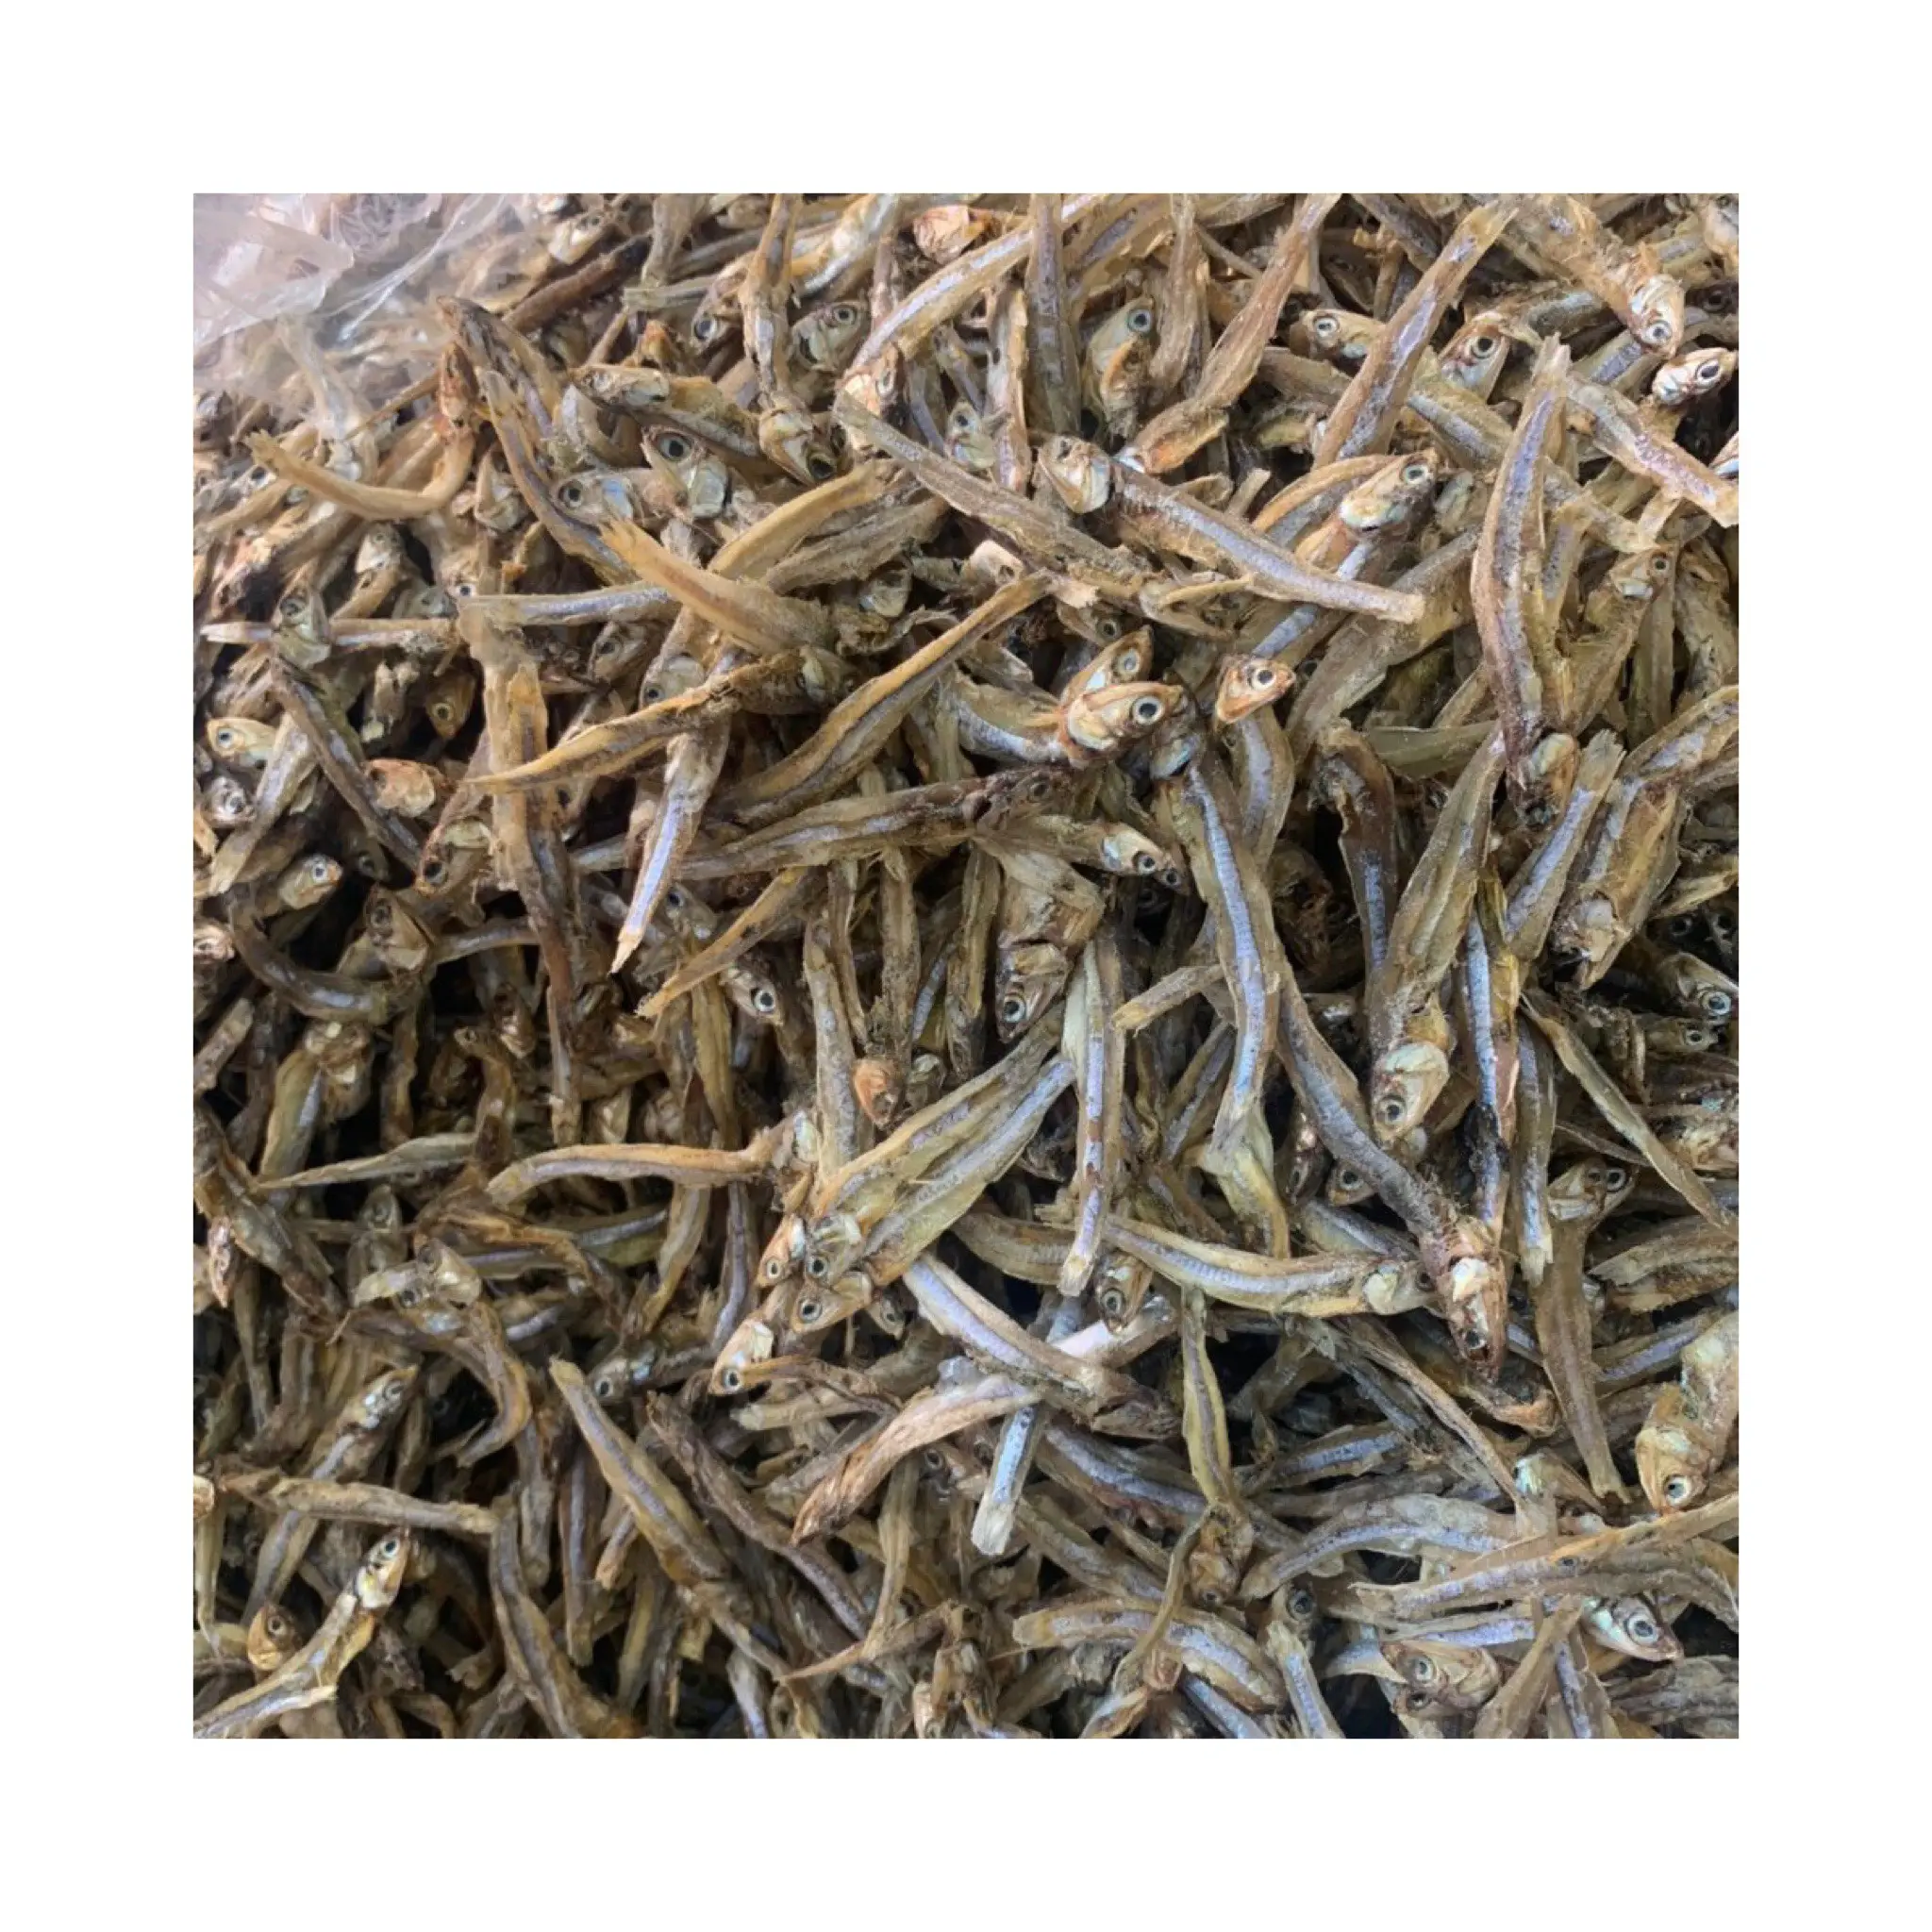 Dry fish Anchovy / Sprats well dried seafood Available / 99 Gold Data Ms Elysia WA 0084789310321